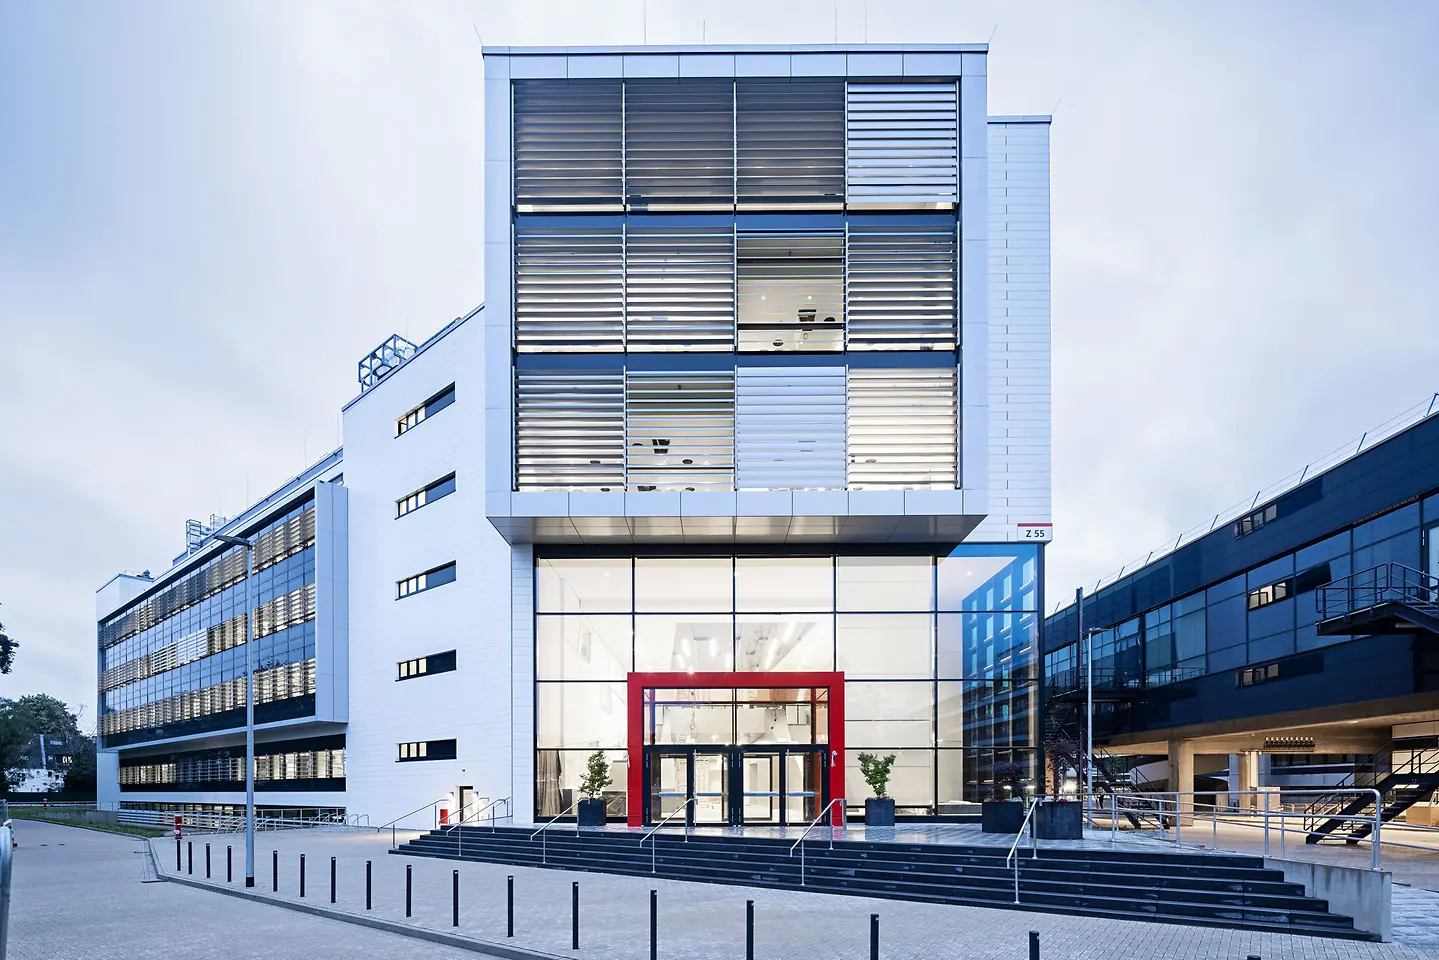 
To take its innovation capabilities to the next level, Adhesive Technologies has opened its Inspiration Center Düsseldorf at its home site in 2022.